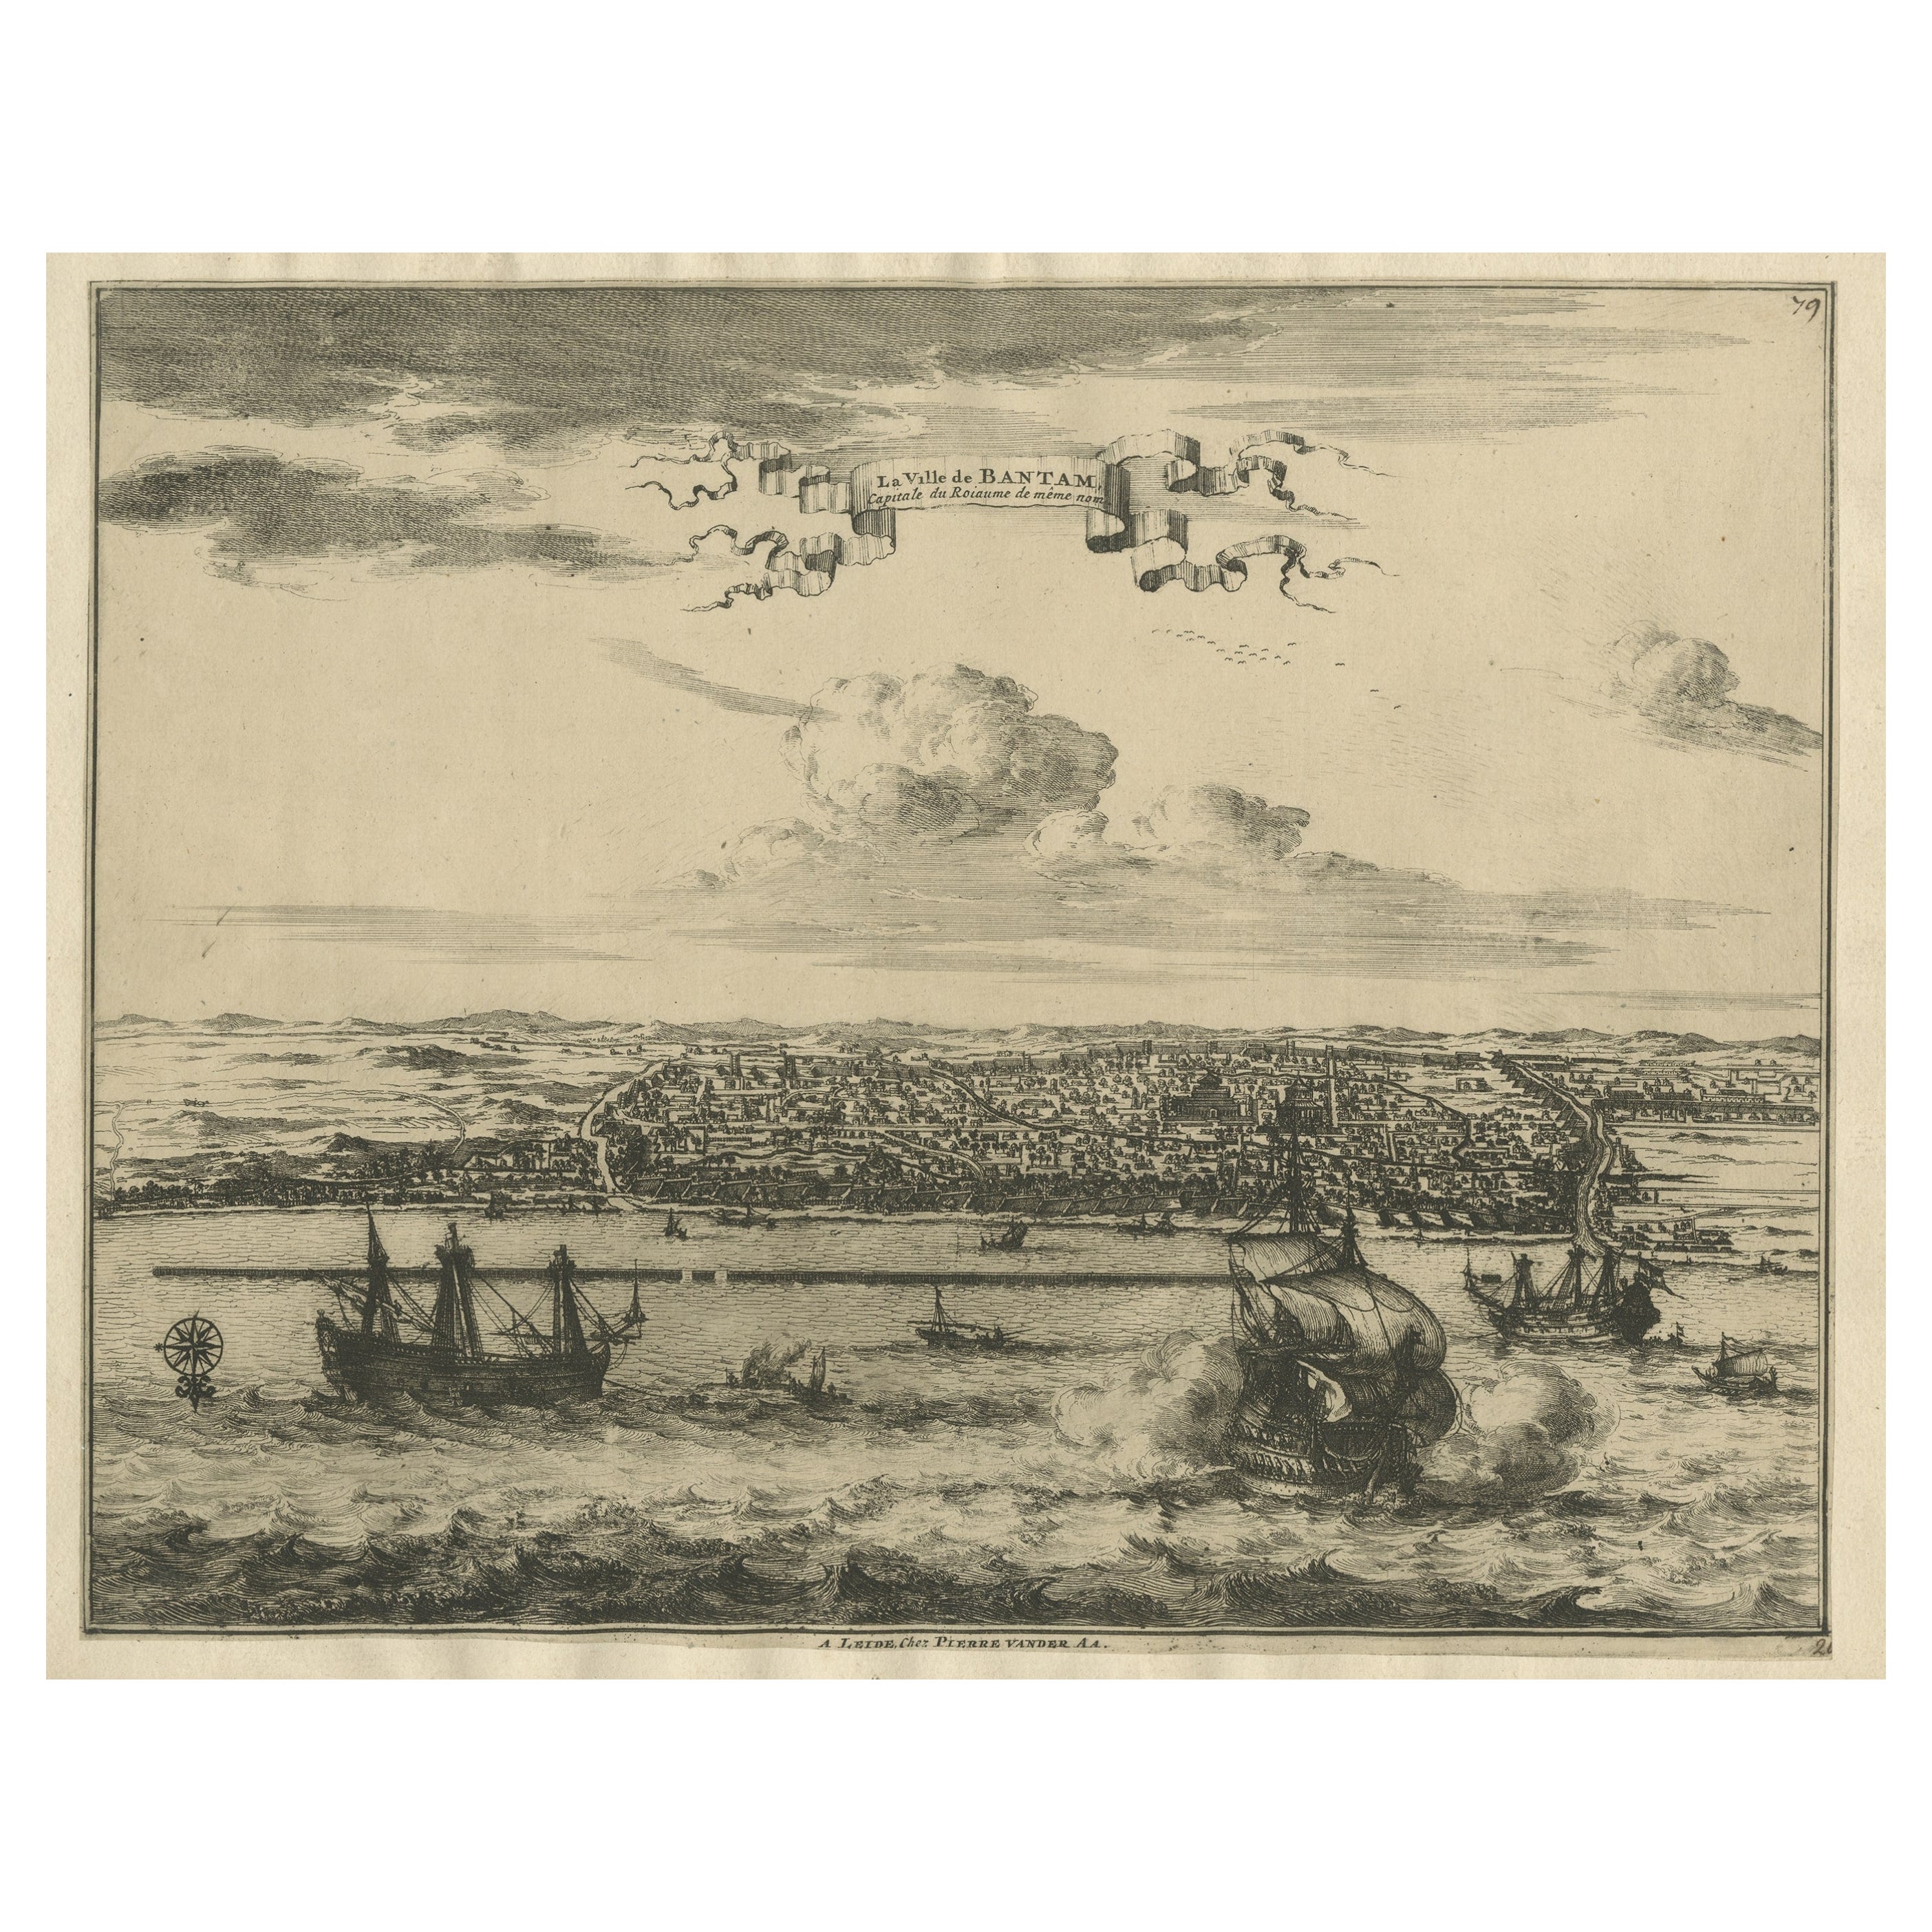 View of the City Banten or Bantam Near the Western End of Java, Indonesia, c1725